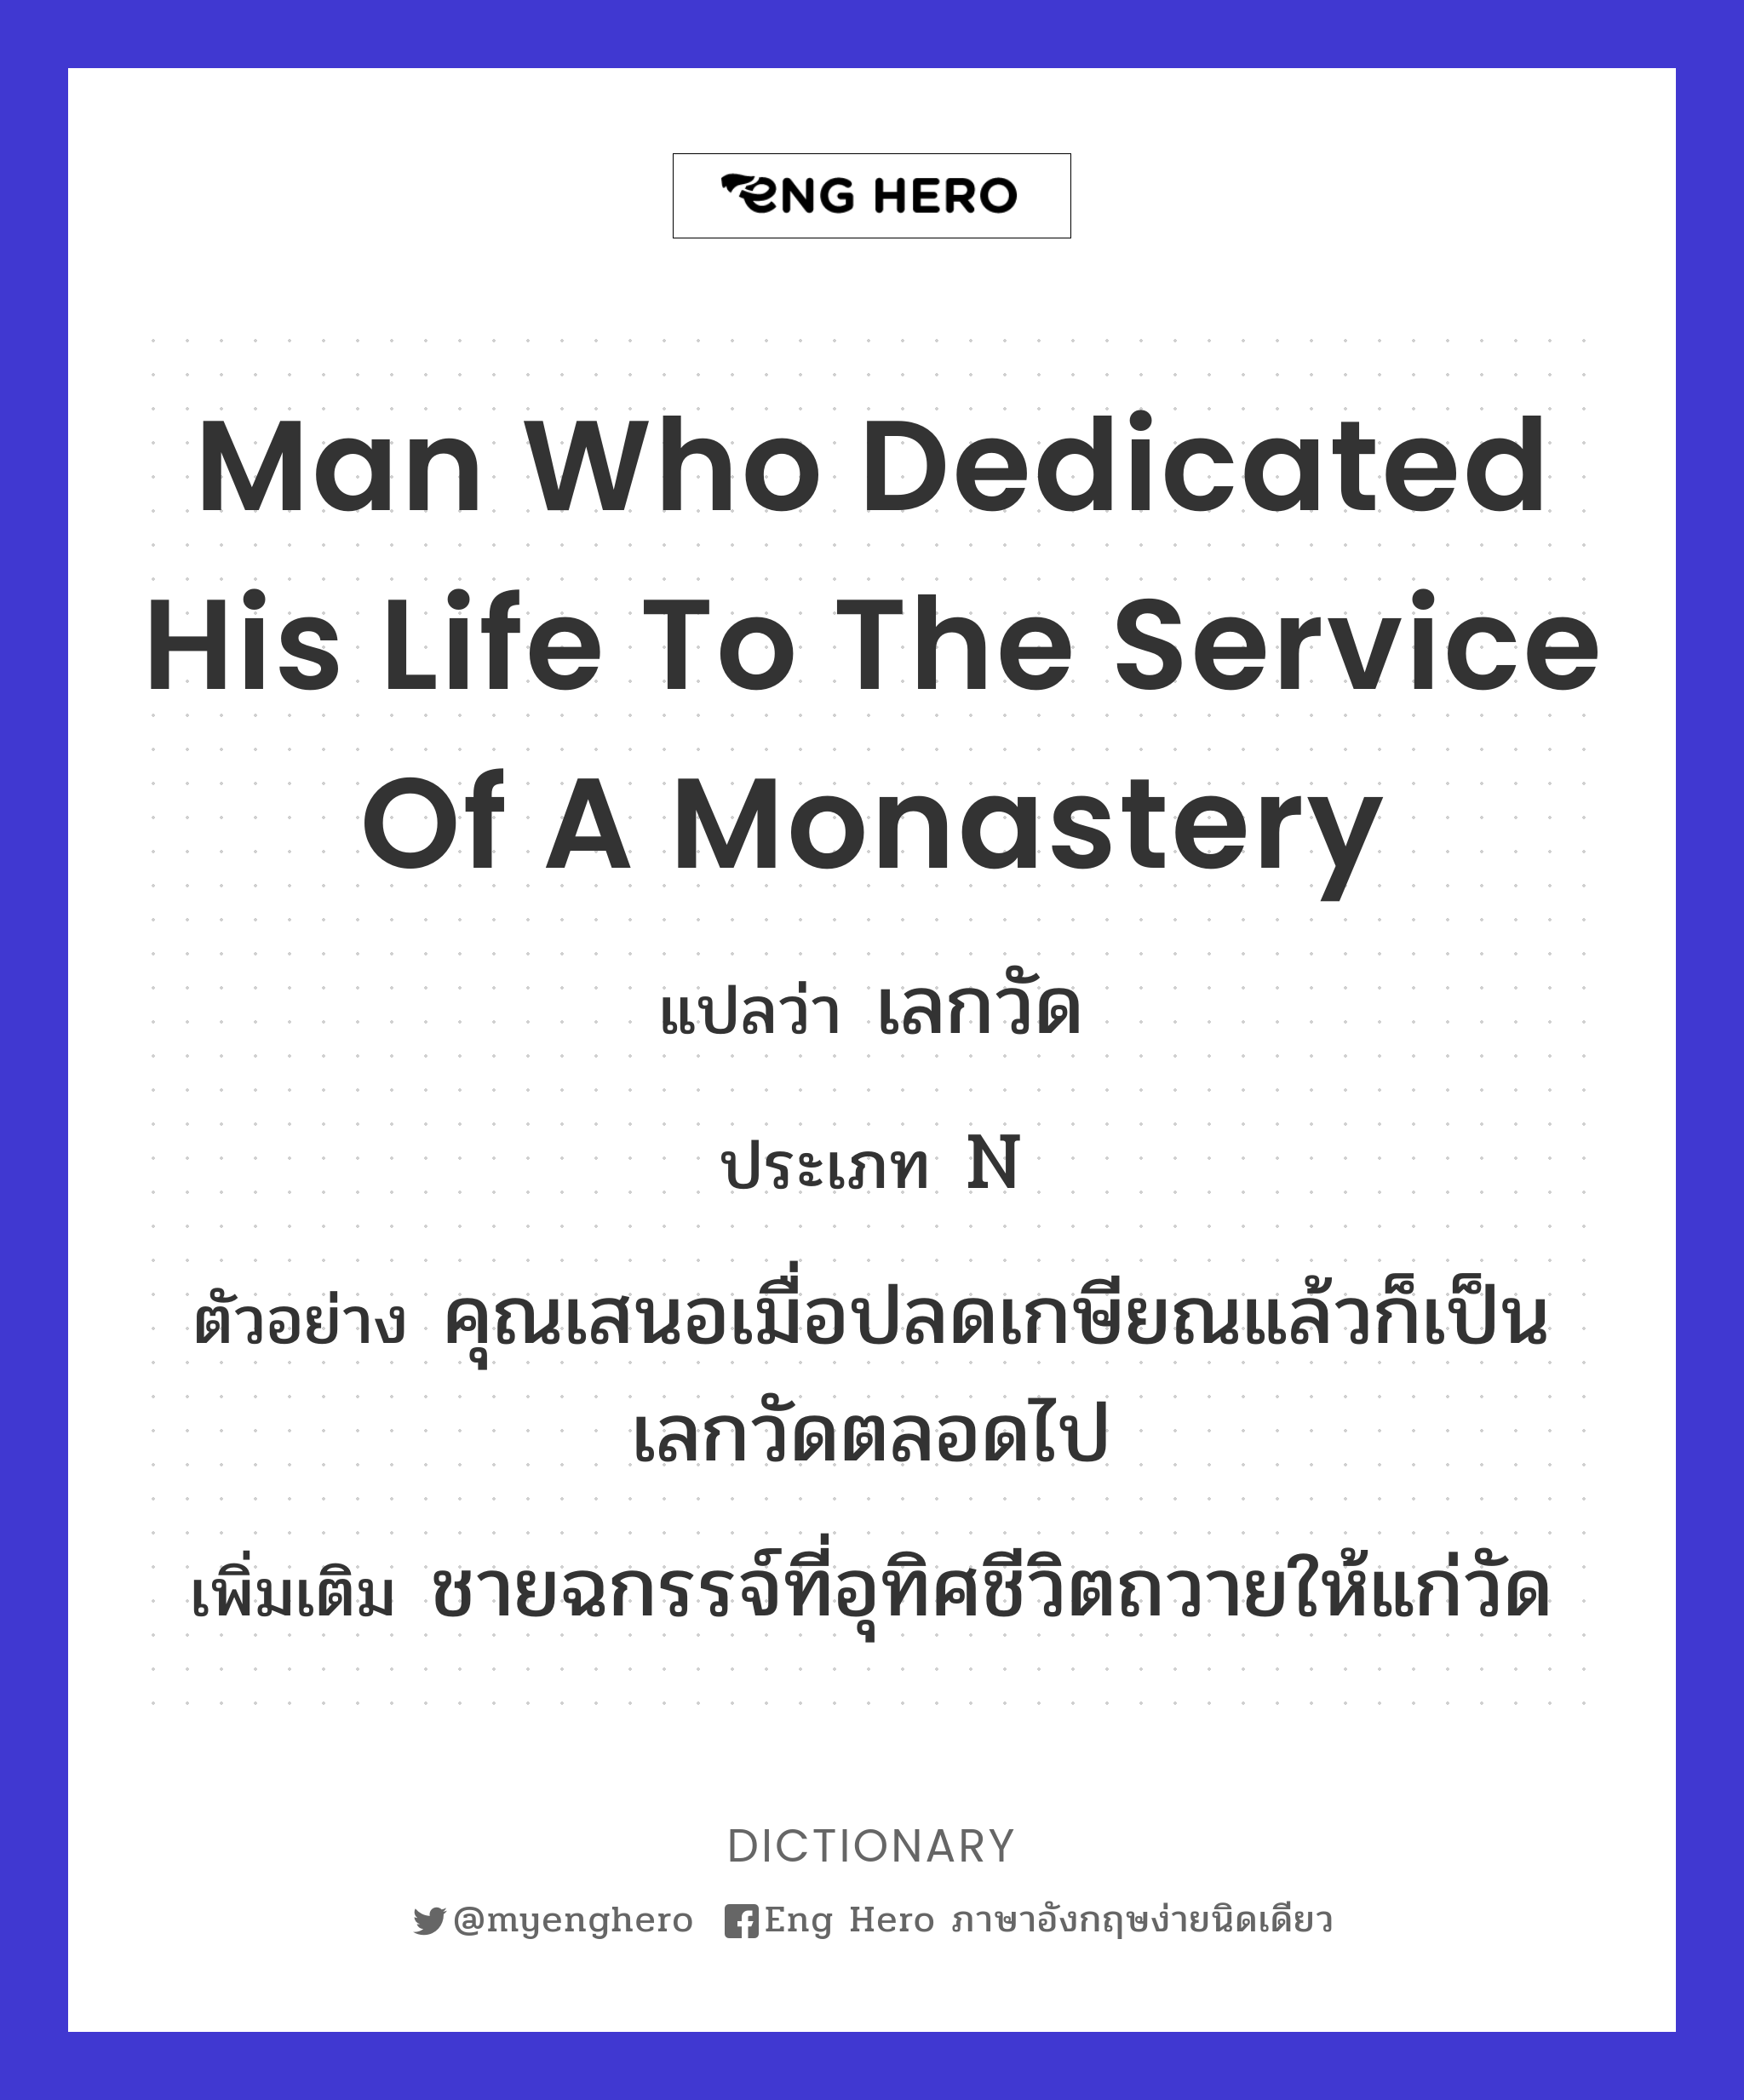 man who dedicated his life to the service of a monastery